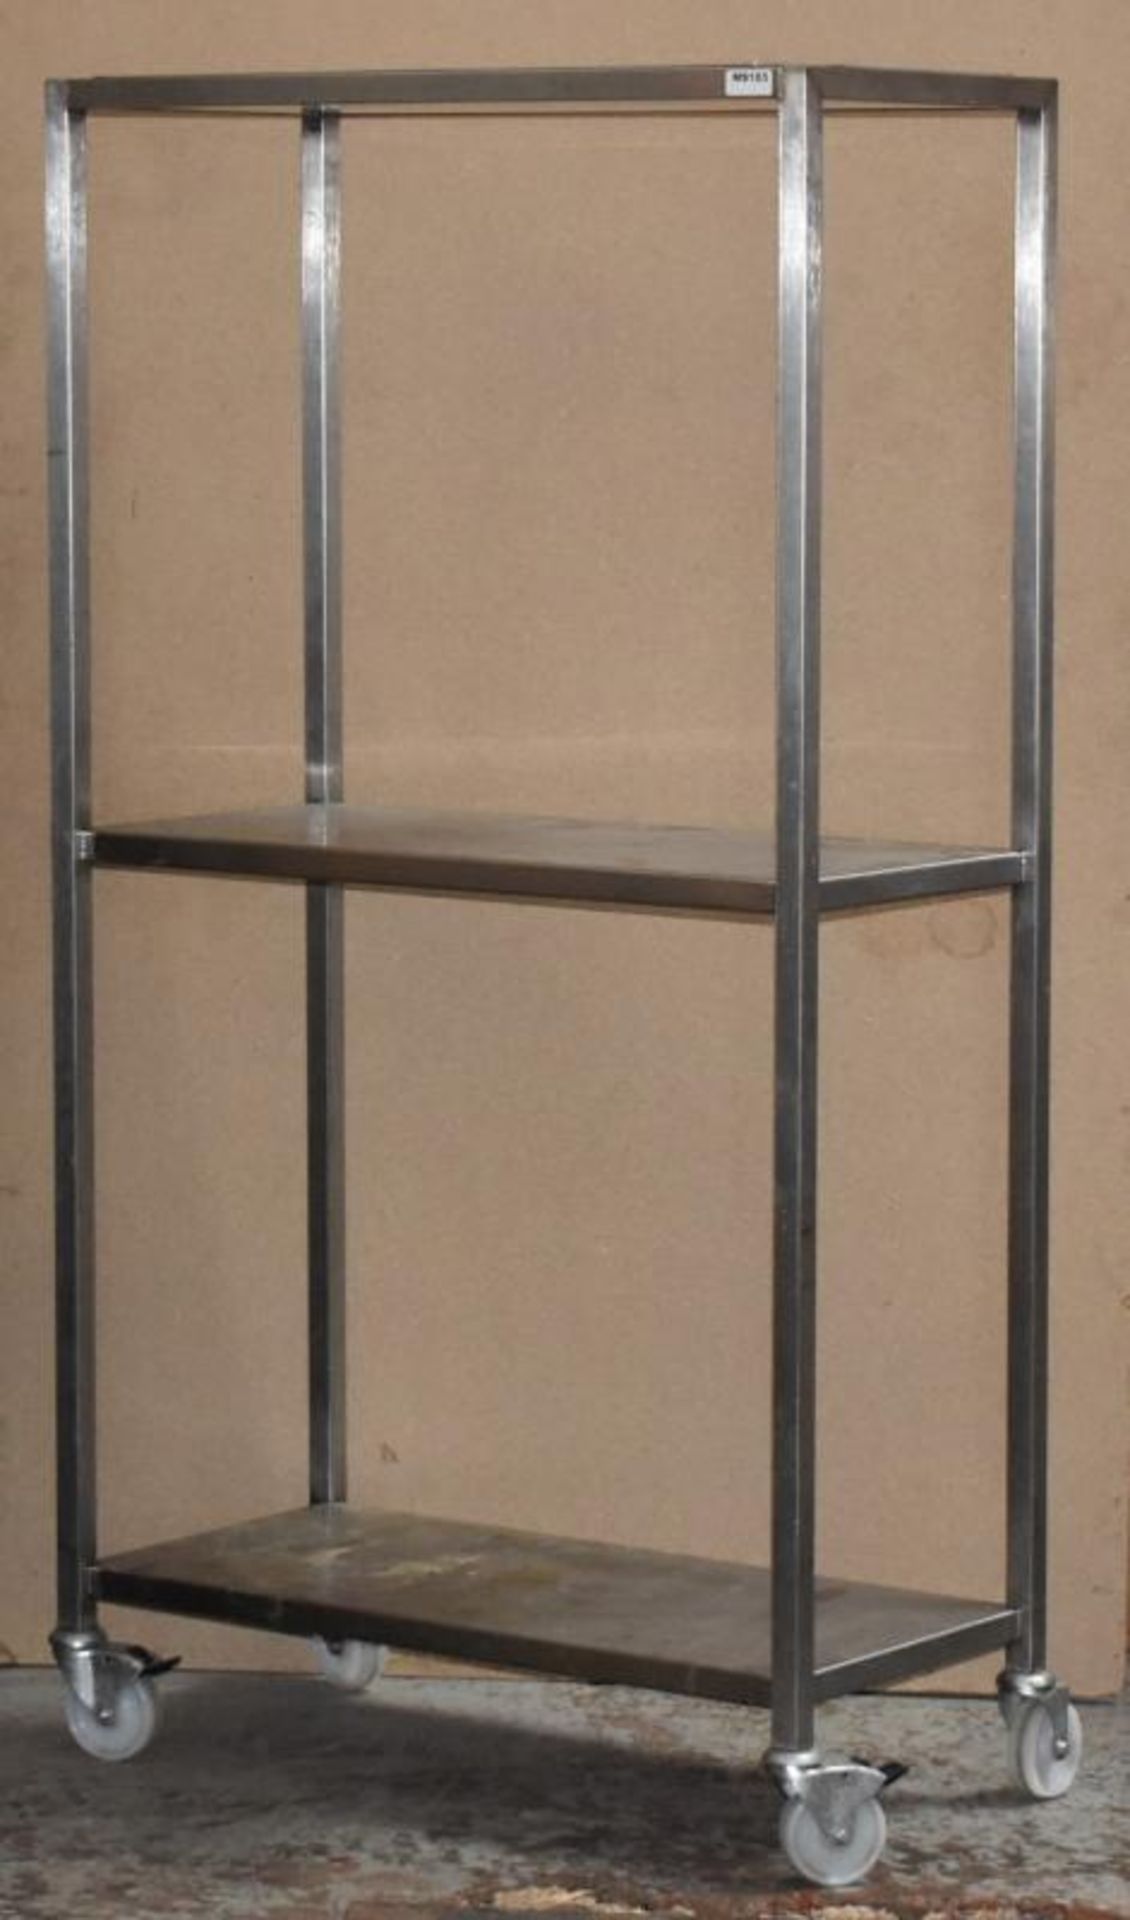 1 x Stainless Steel 2 Tier Mobile Shelf Unit For Commercial Kitchens - H170 x W90 x 45 cms - CL533 -